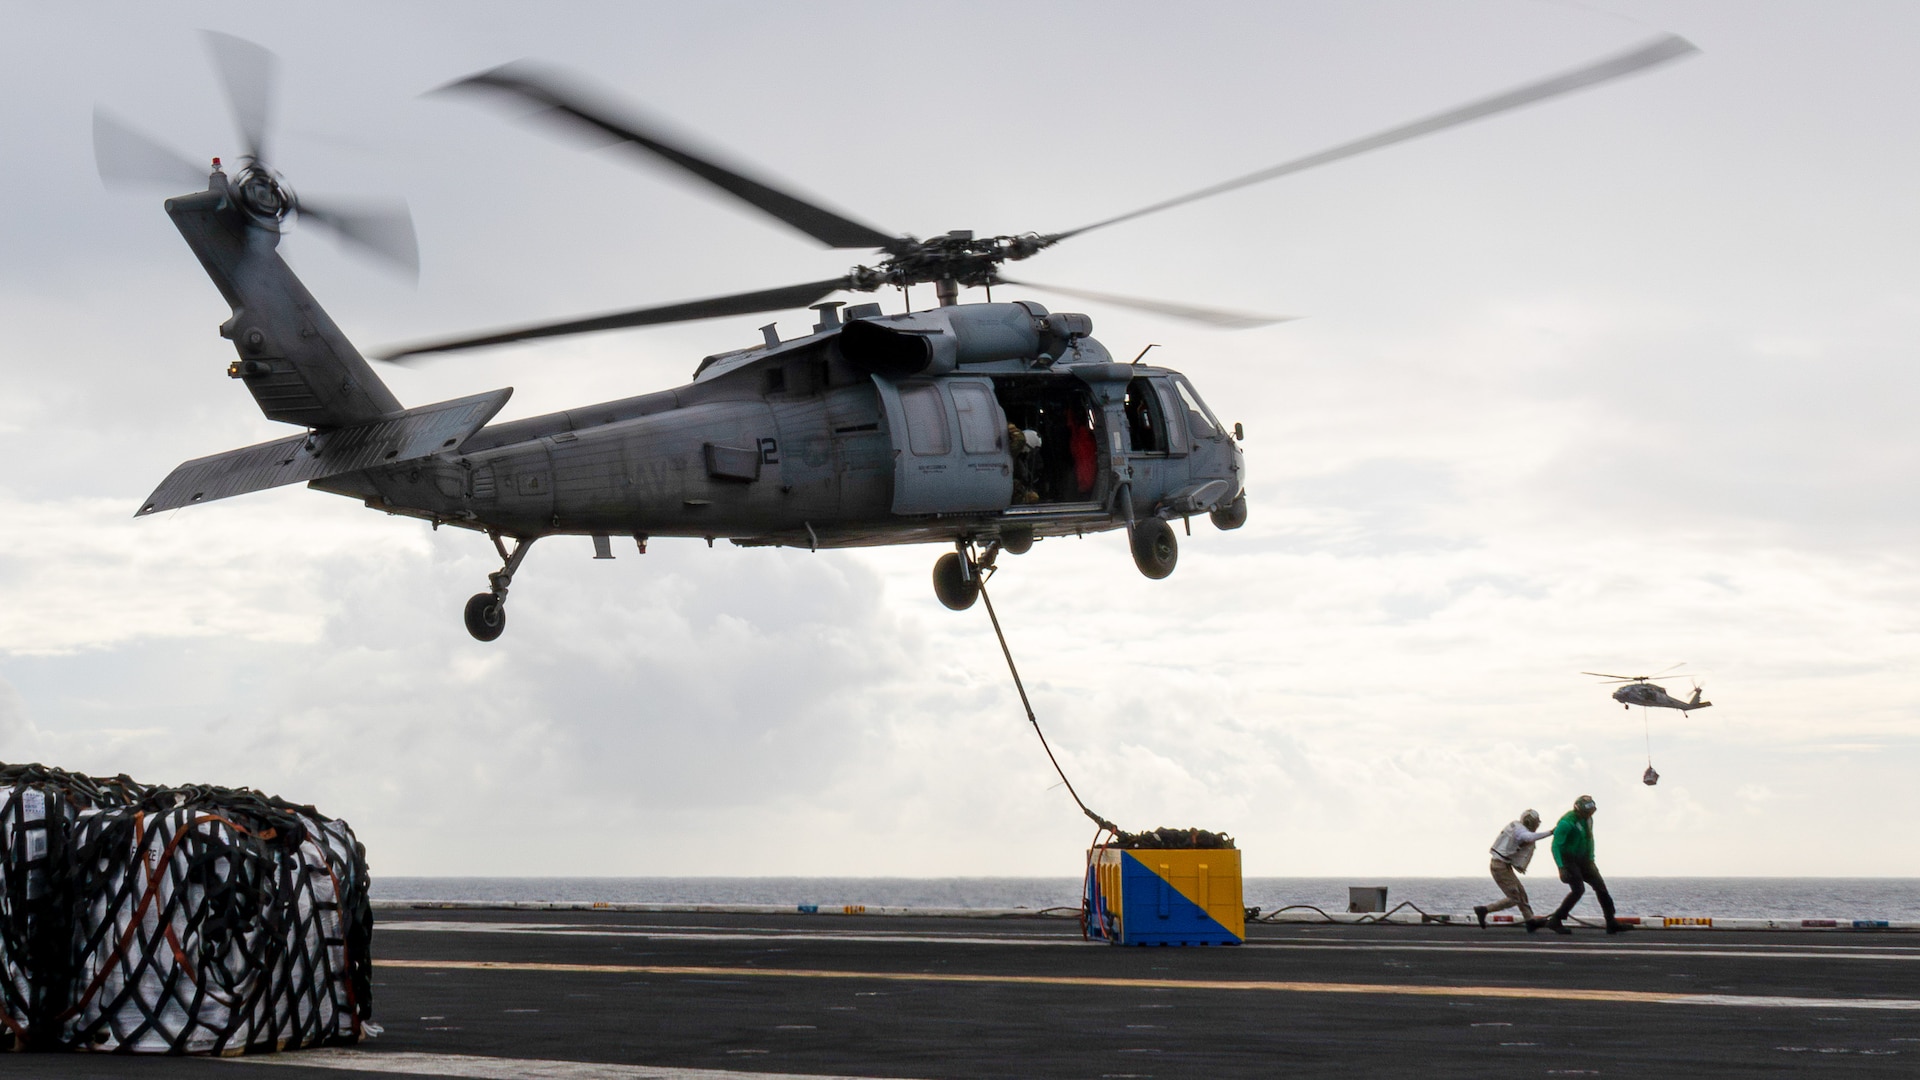 231215-N-TD381-1184 SOUTH CHINA SEA (Dec. 15, 2023) An MH-60S Sea Hawk, assigned to the “Black Knights” of Helicopter Sea Combat Squadron (HSC) 4, transports cargo onto the flight deck of Nimitz-class aircraft carrier USS Carl Vinson (CVN 70) during a replenishment-at-sea with Lewis and Clark-class dry cargo ship USNS Wally Schirra (T-AKE-8). Vinson, flagship of Carrier Strike Group ONE, is deployed to the U.S. 7th Fleet area of operations in support of a free and open Indo-Pacific. (U.S. Navy photo by Mass Communication Specialist 2nd Class Isaiah B Goessl)